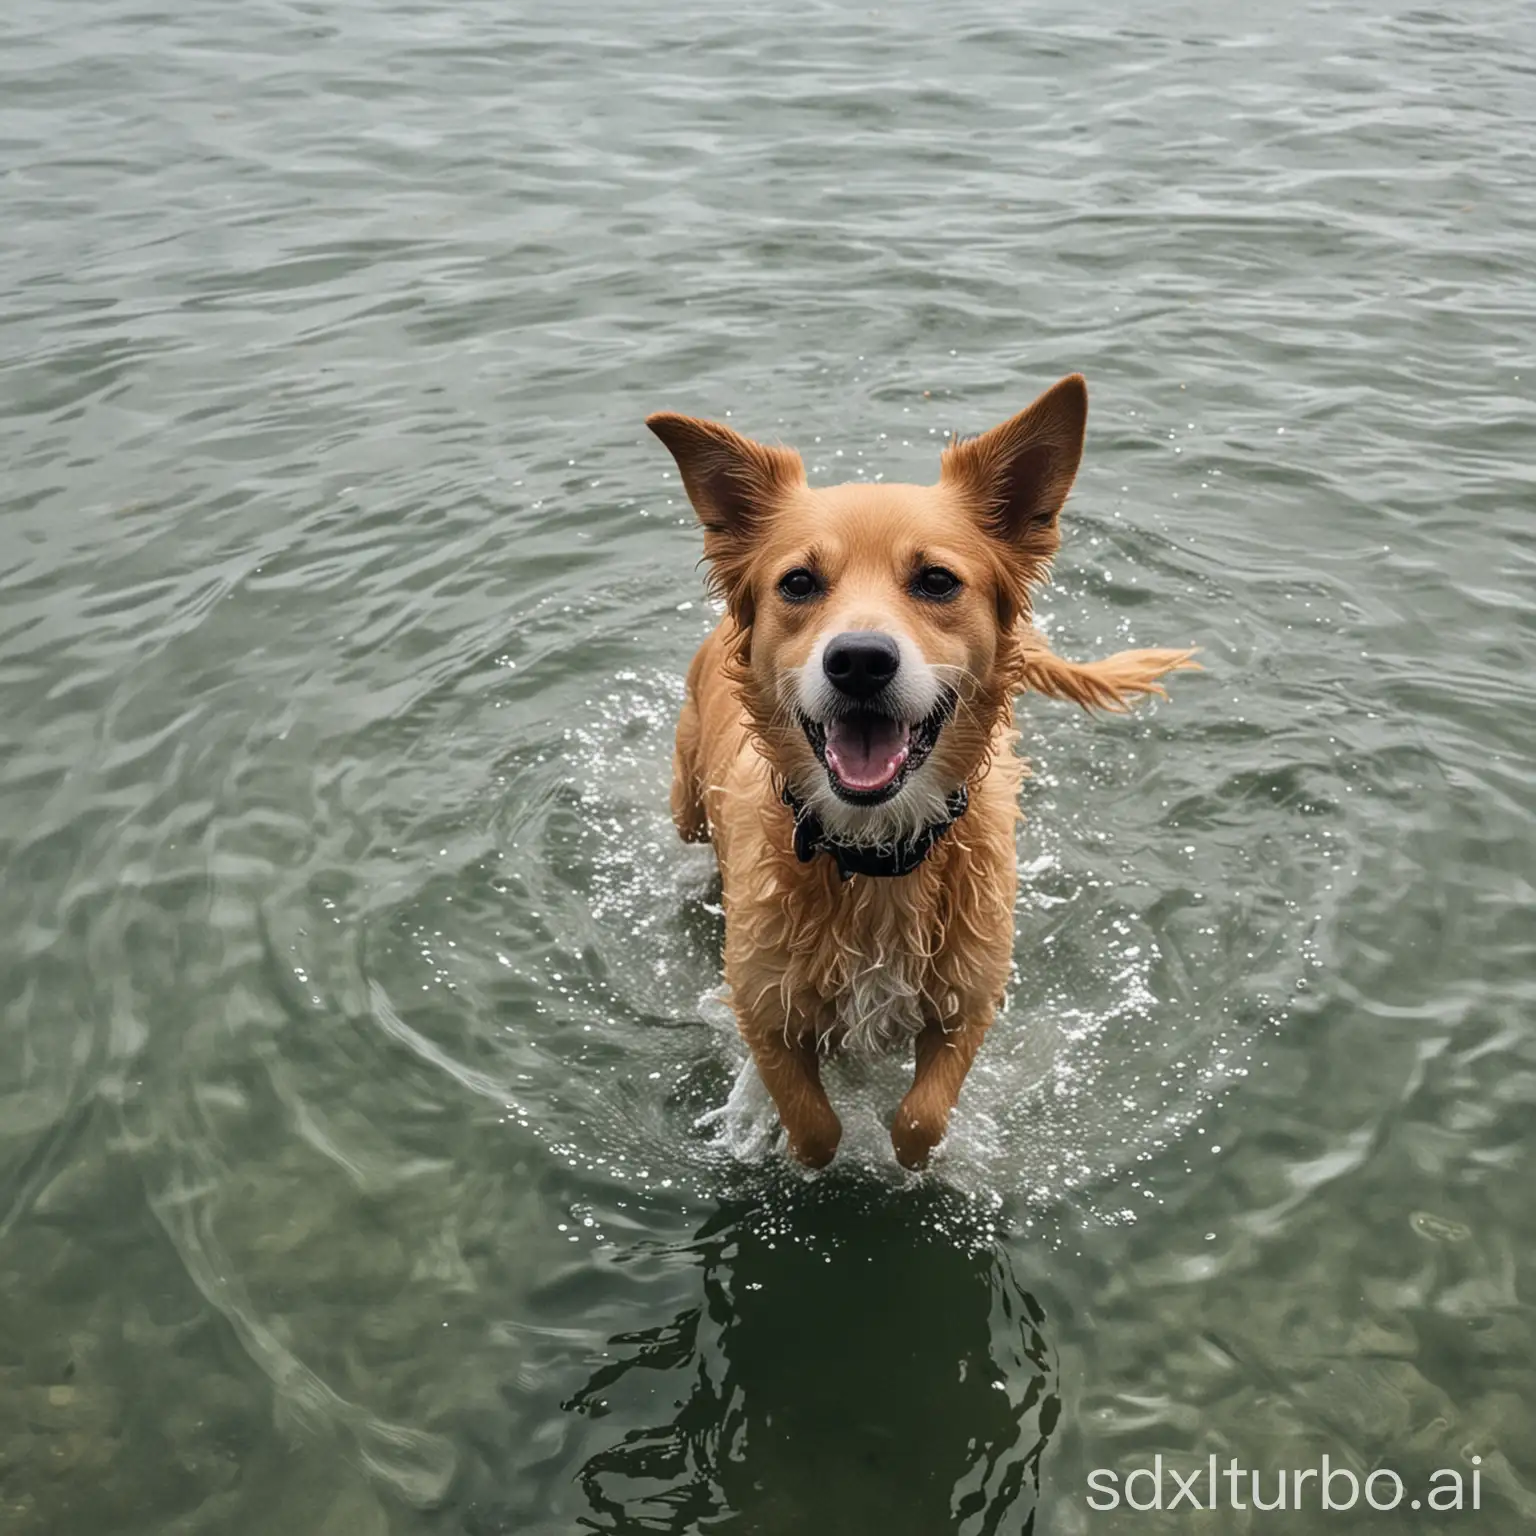 Playful-Dog-Swimming-in-the-Ocean